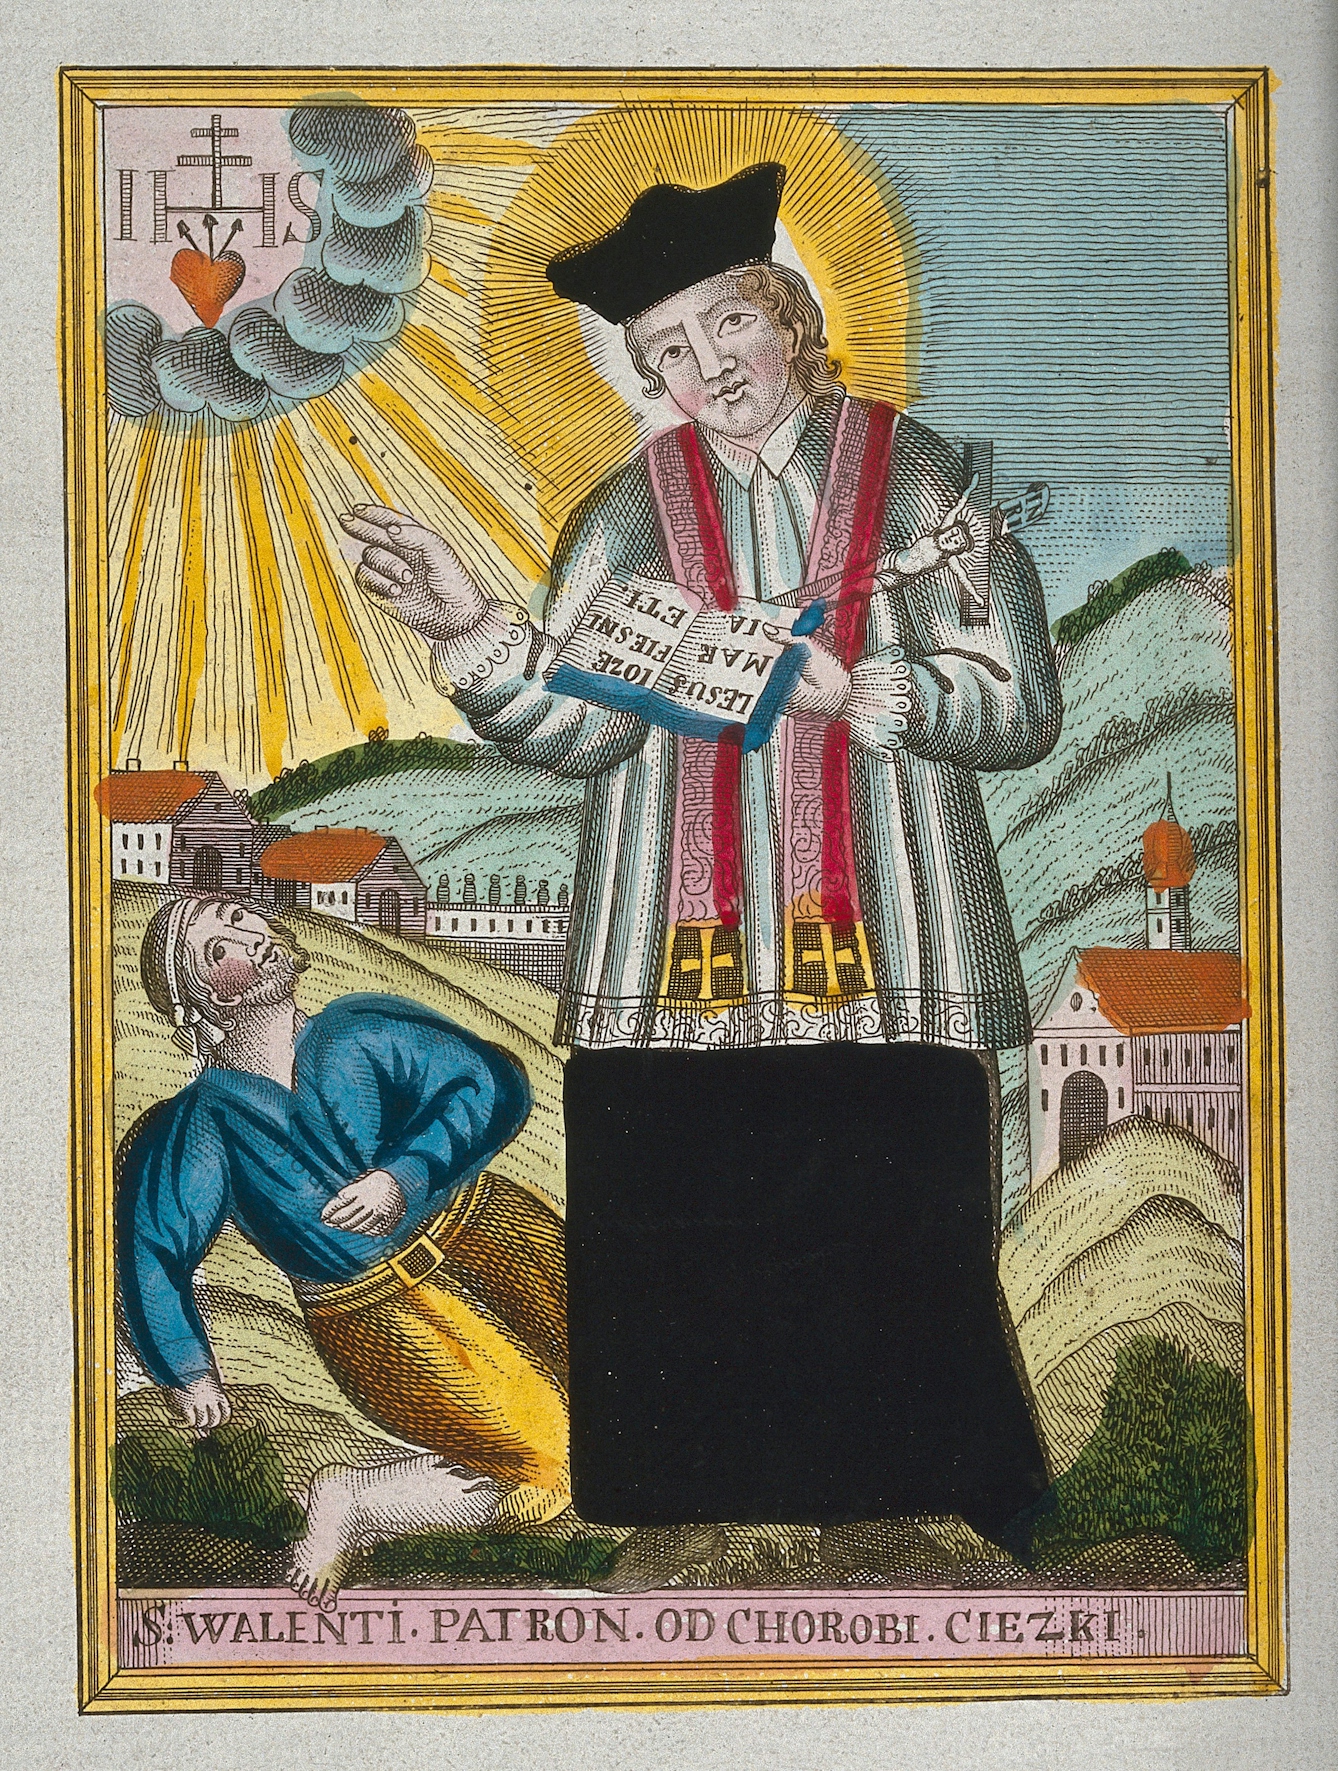 St Valentine blessing a man at his feet who has ‘falling sickness’ – an old name for epilepsy .